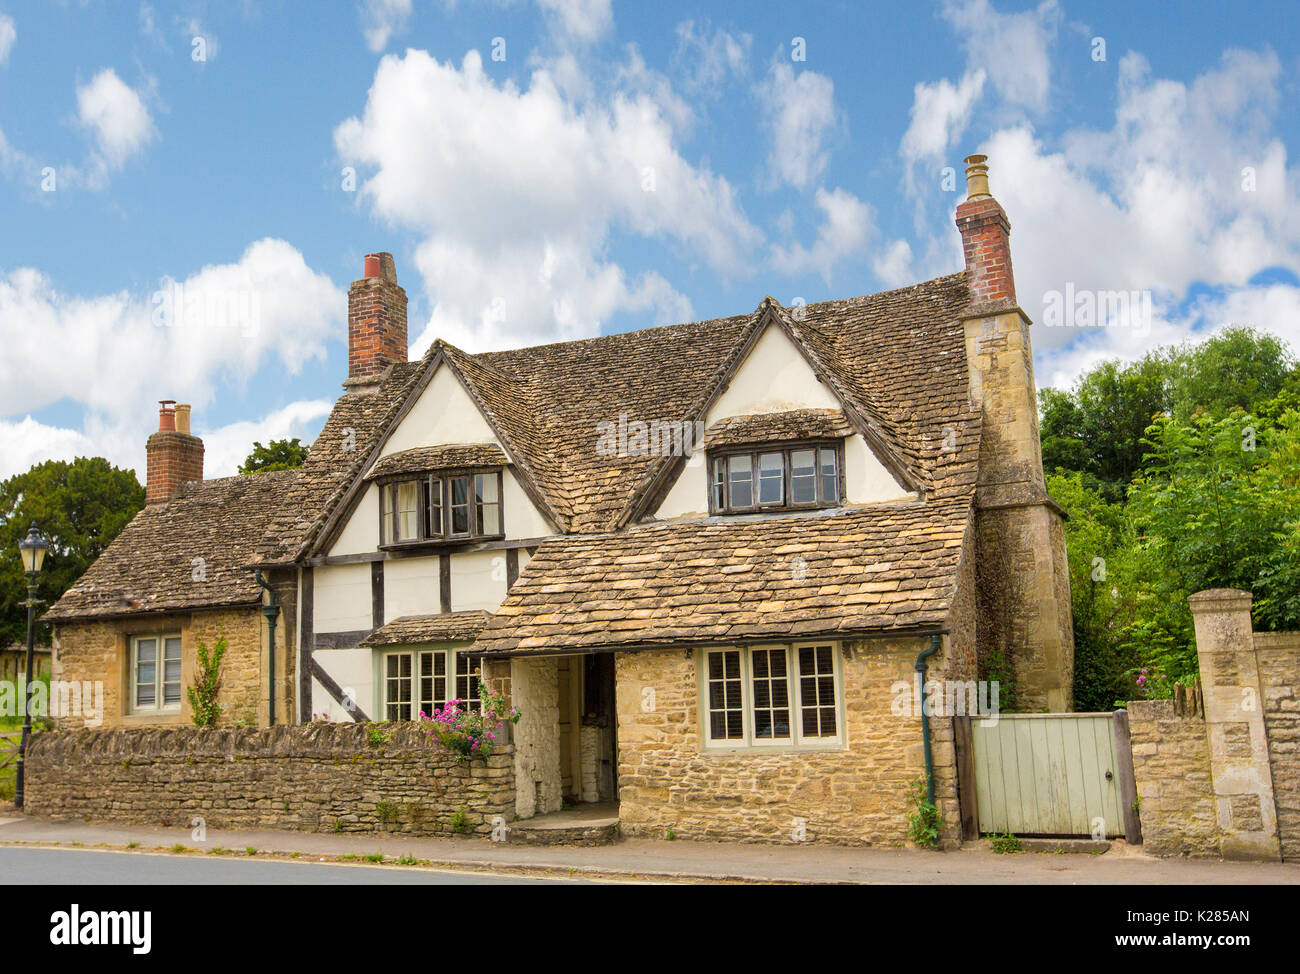 Historic house under blue sky in village of Lacock, Wiltshire, England Stock Photo